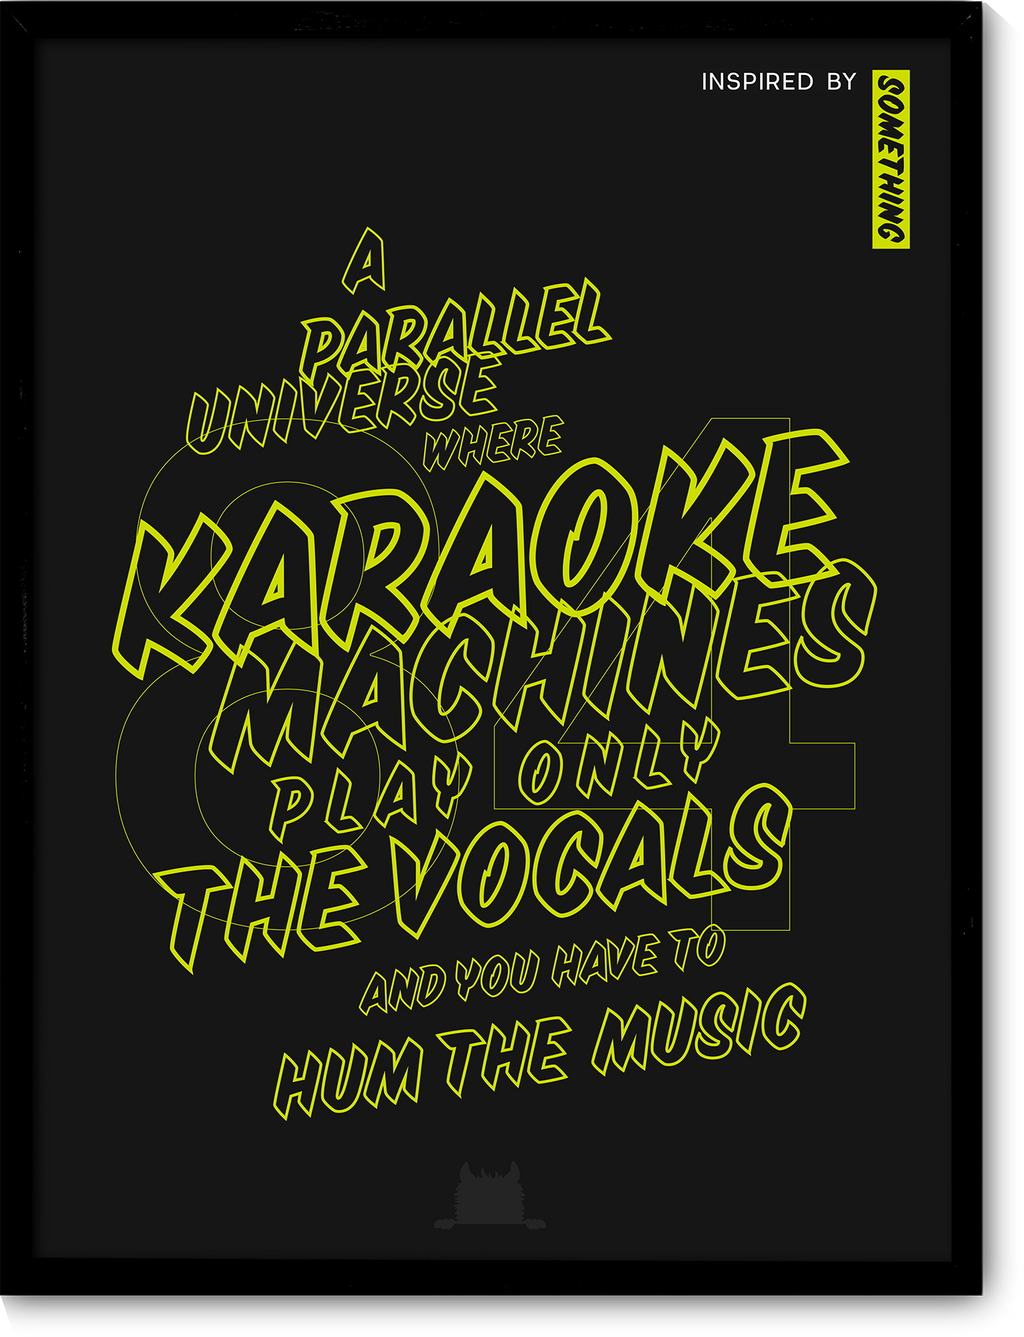 #84 Inspired by a parallel universe, where karaoke machines play only the vocals of the songs and you have to hum the music.